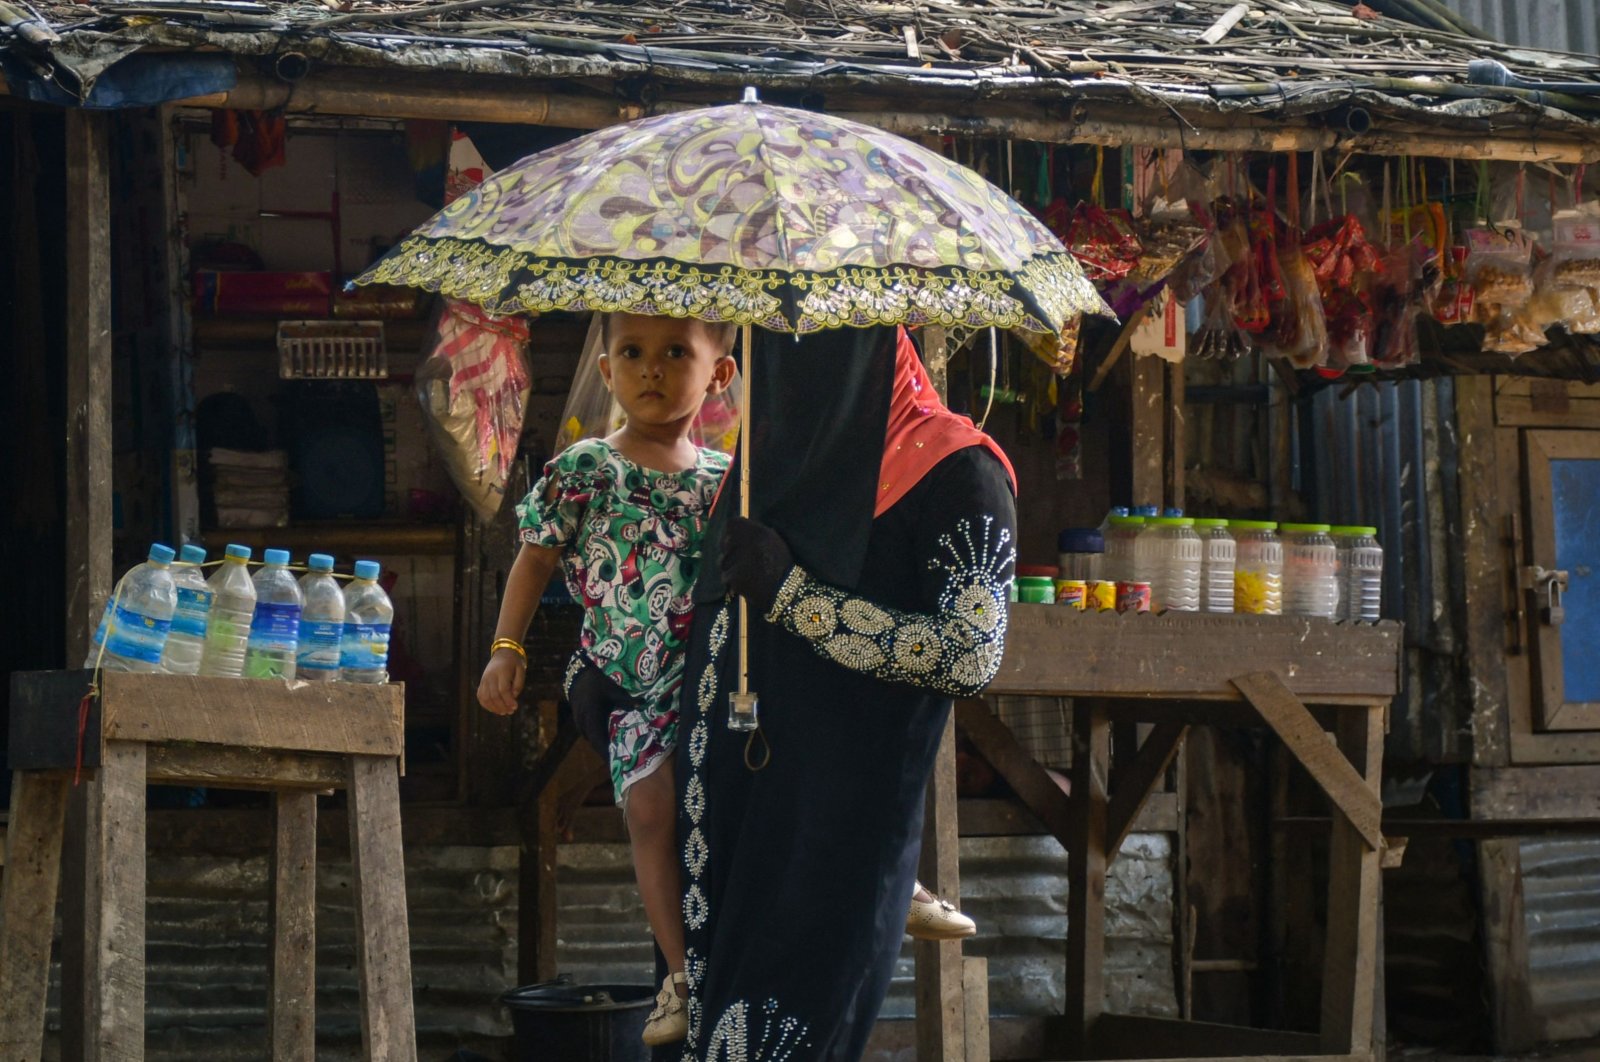 A member of the internally displaced Rohingya Muslim community carries a child as she walks through the Thet Kay Pyin camp in Sittwe, Myanmar, June 5, 2021. (AFP Photo)